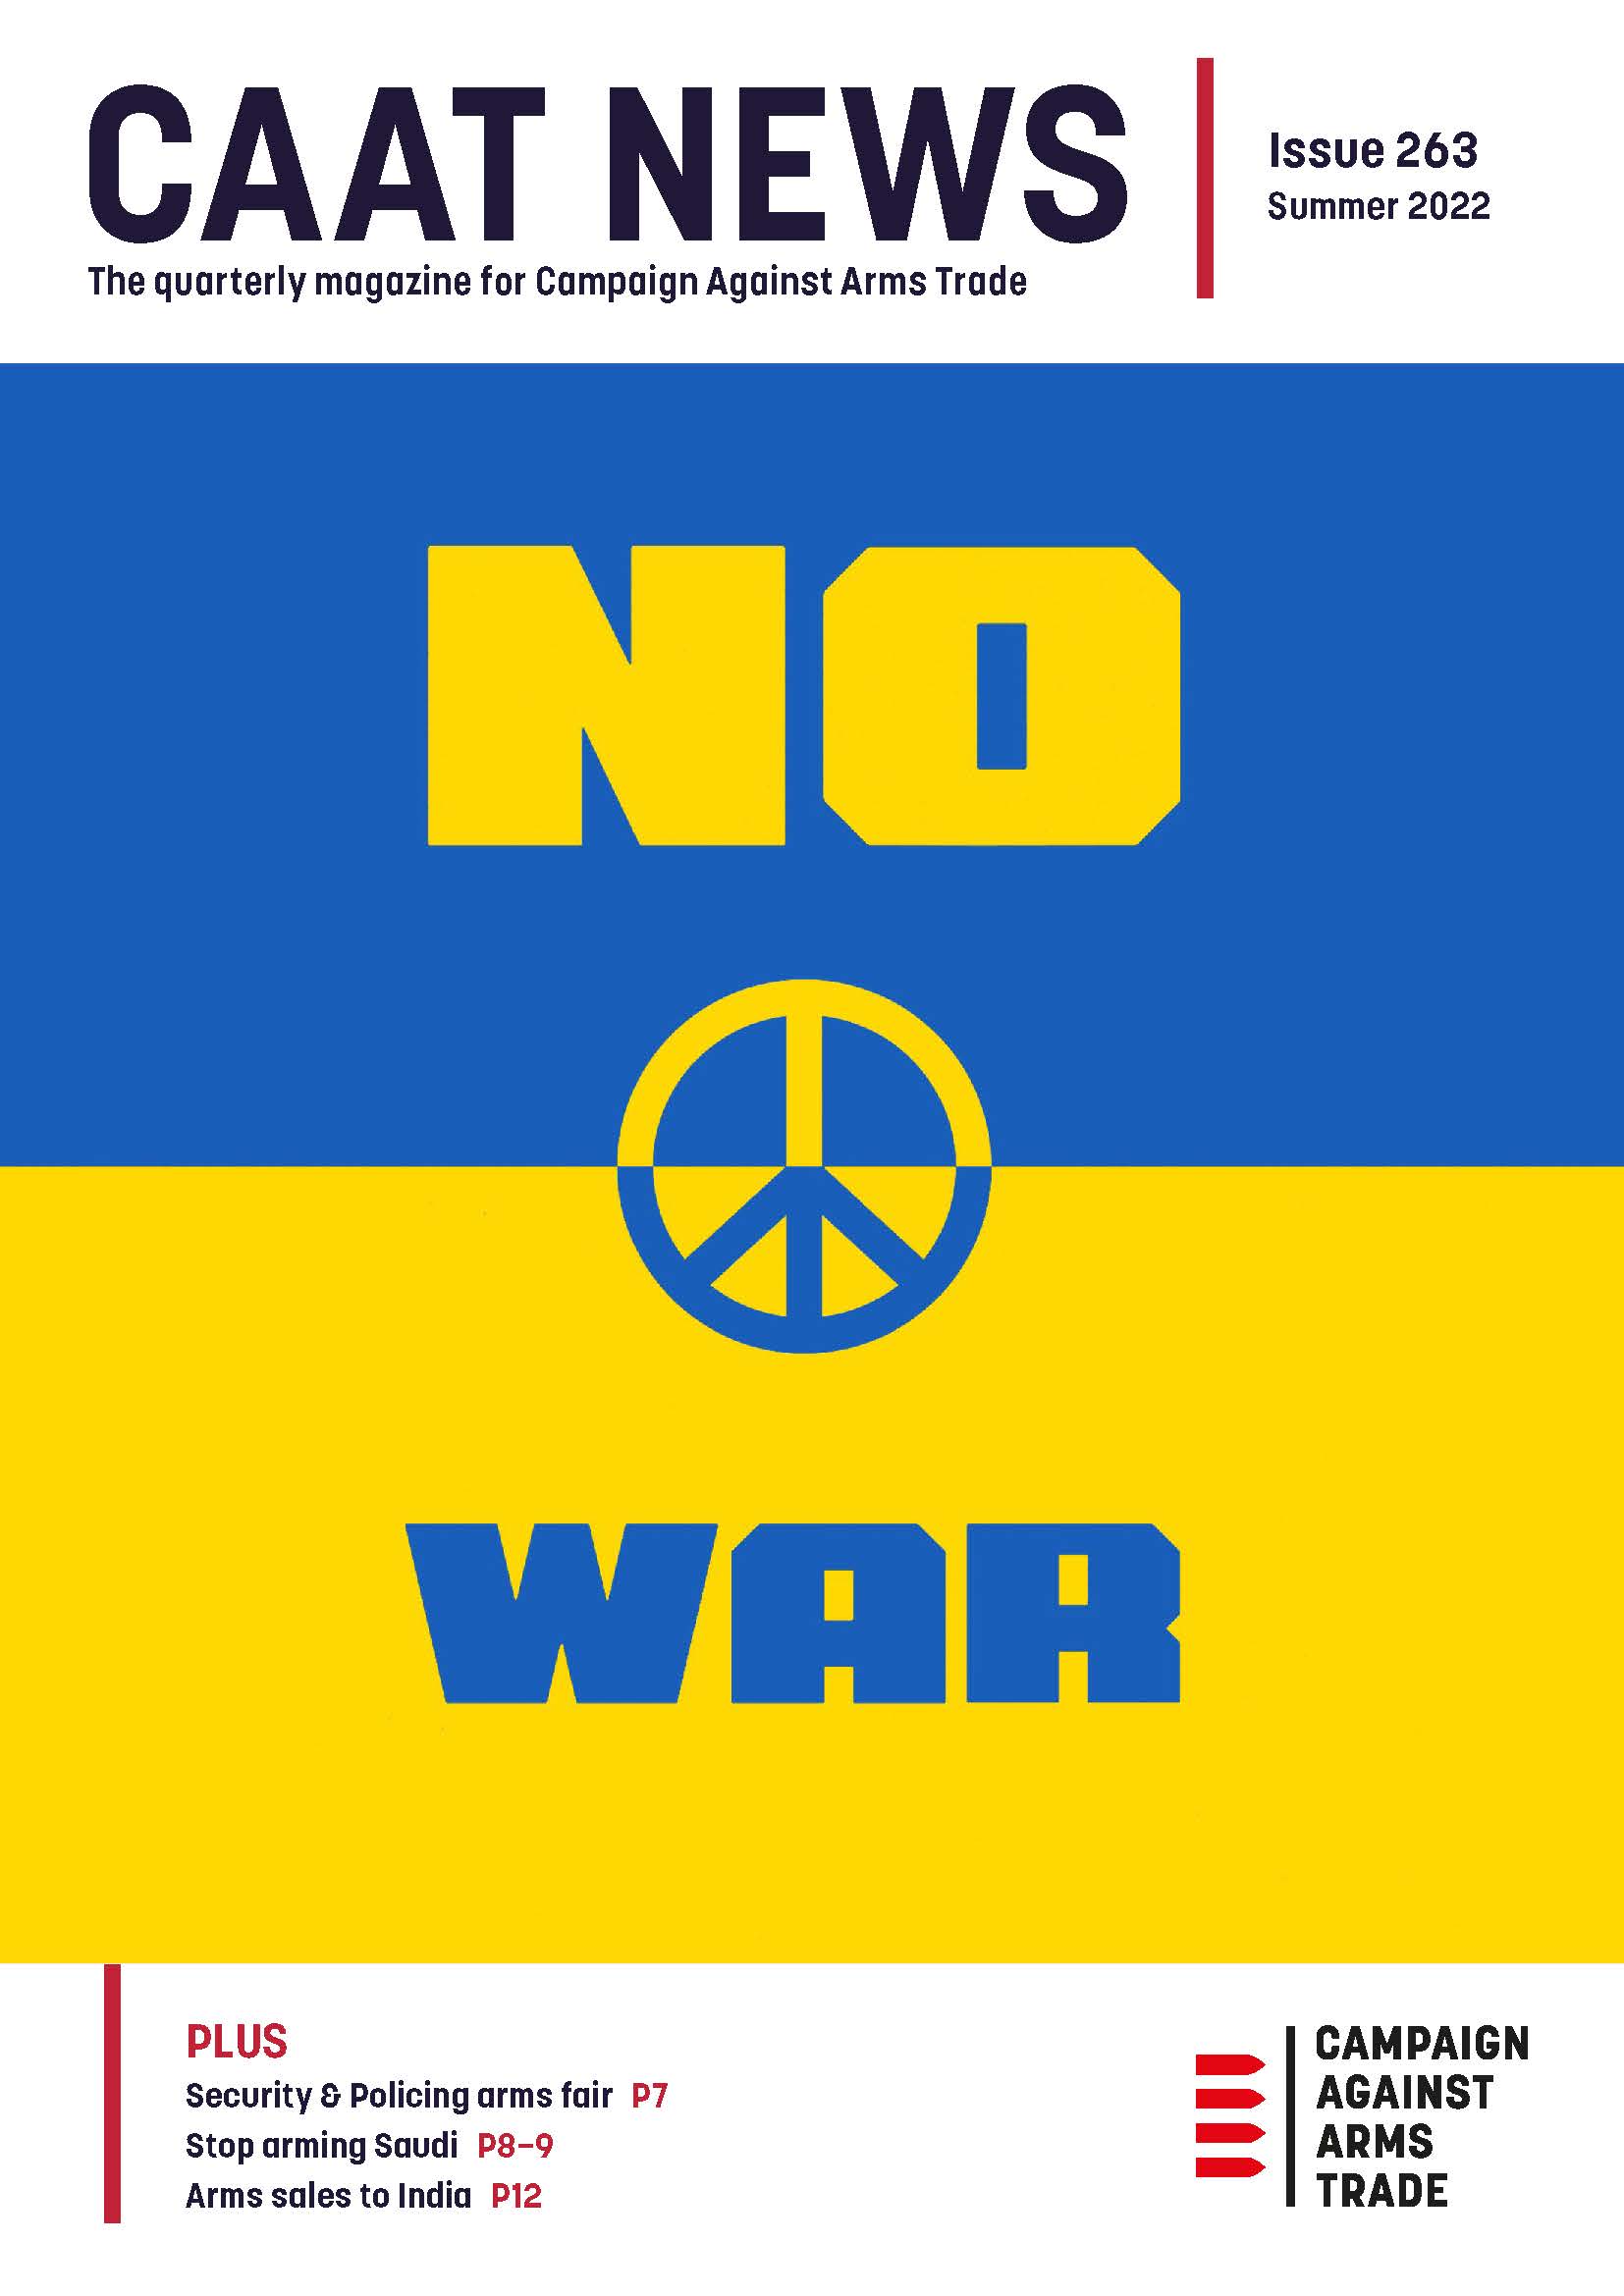 CAAT News cover. Text: CAAT News. The quarterly magazine for Campaign Against Arms Trade. Issue 263, summer 2022. Image of a Ukrainian flag with text "NO WAR" and a peace symbol. Text below: PLUS : security & policing arms fair p7. Stop arming Saudi p8-9. Arms sales to India p12. CAAT logo in bottom right.